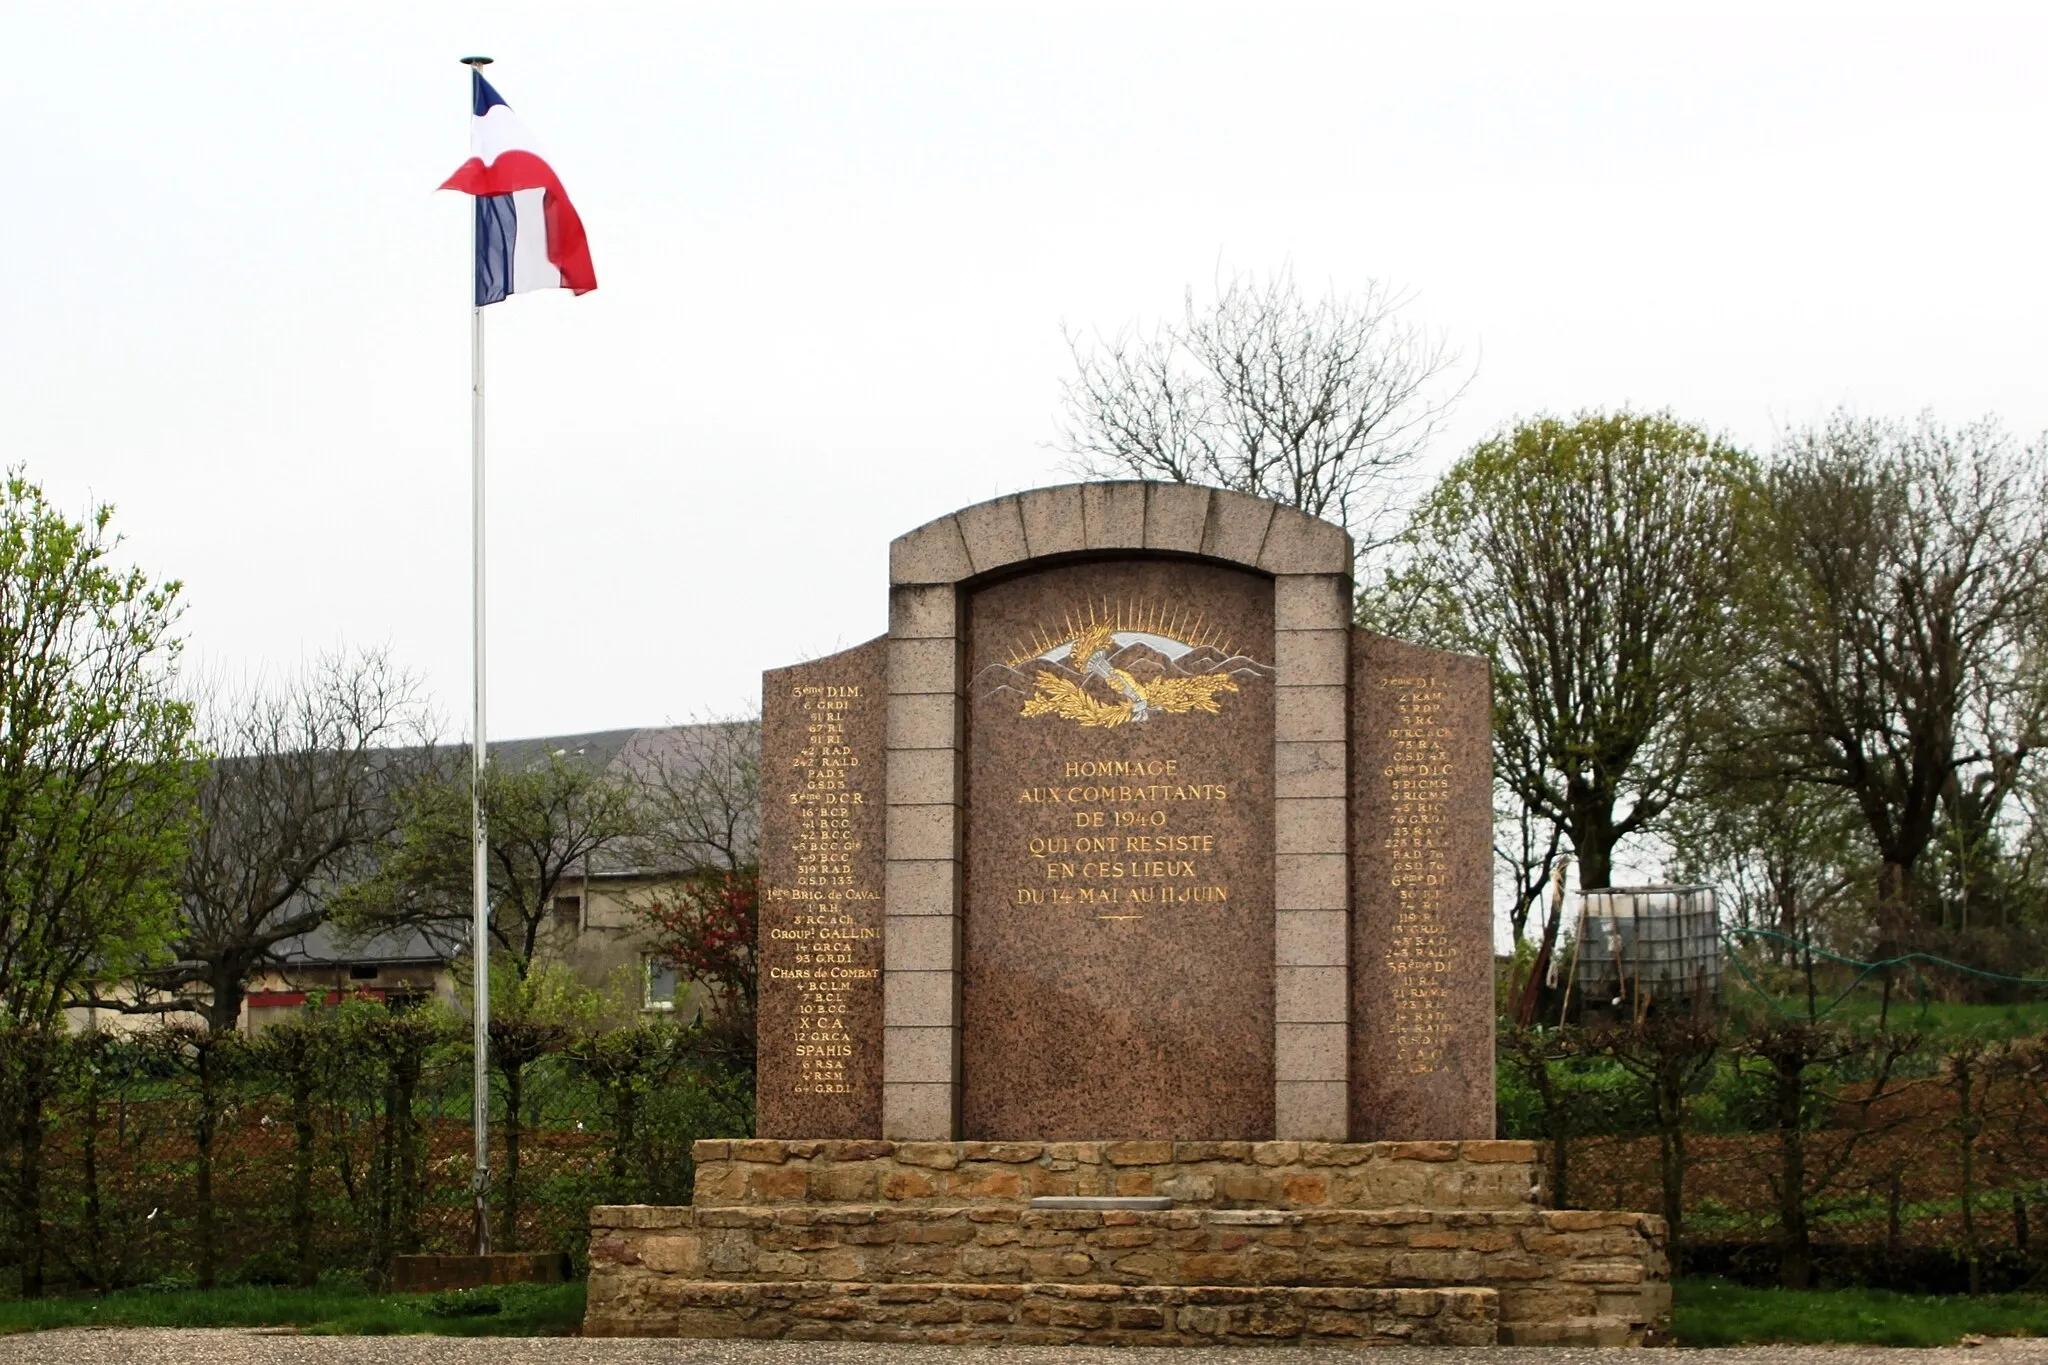 Photo showing: Memorial in Stonne (Ardennes, France) with the names of all french Units involved during the battle of Stonne